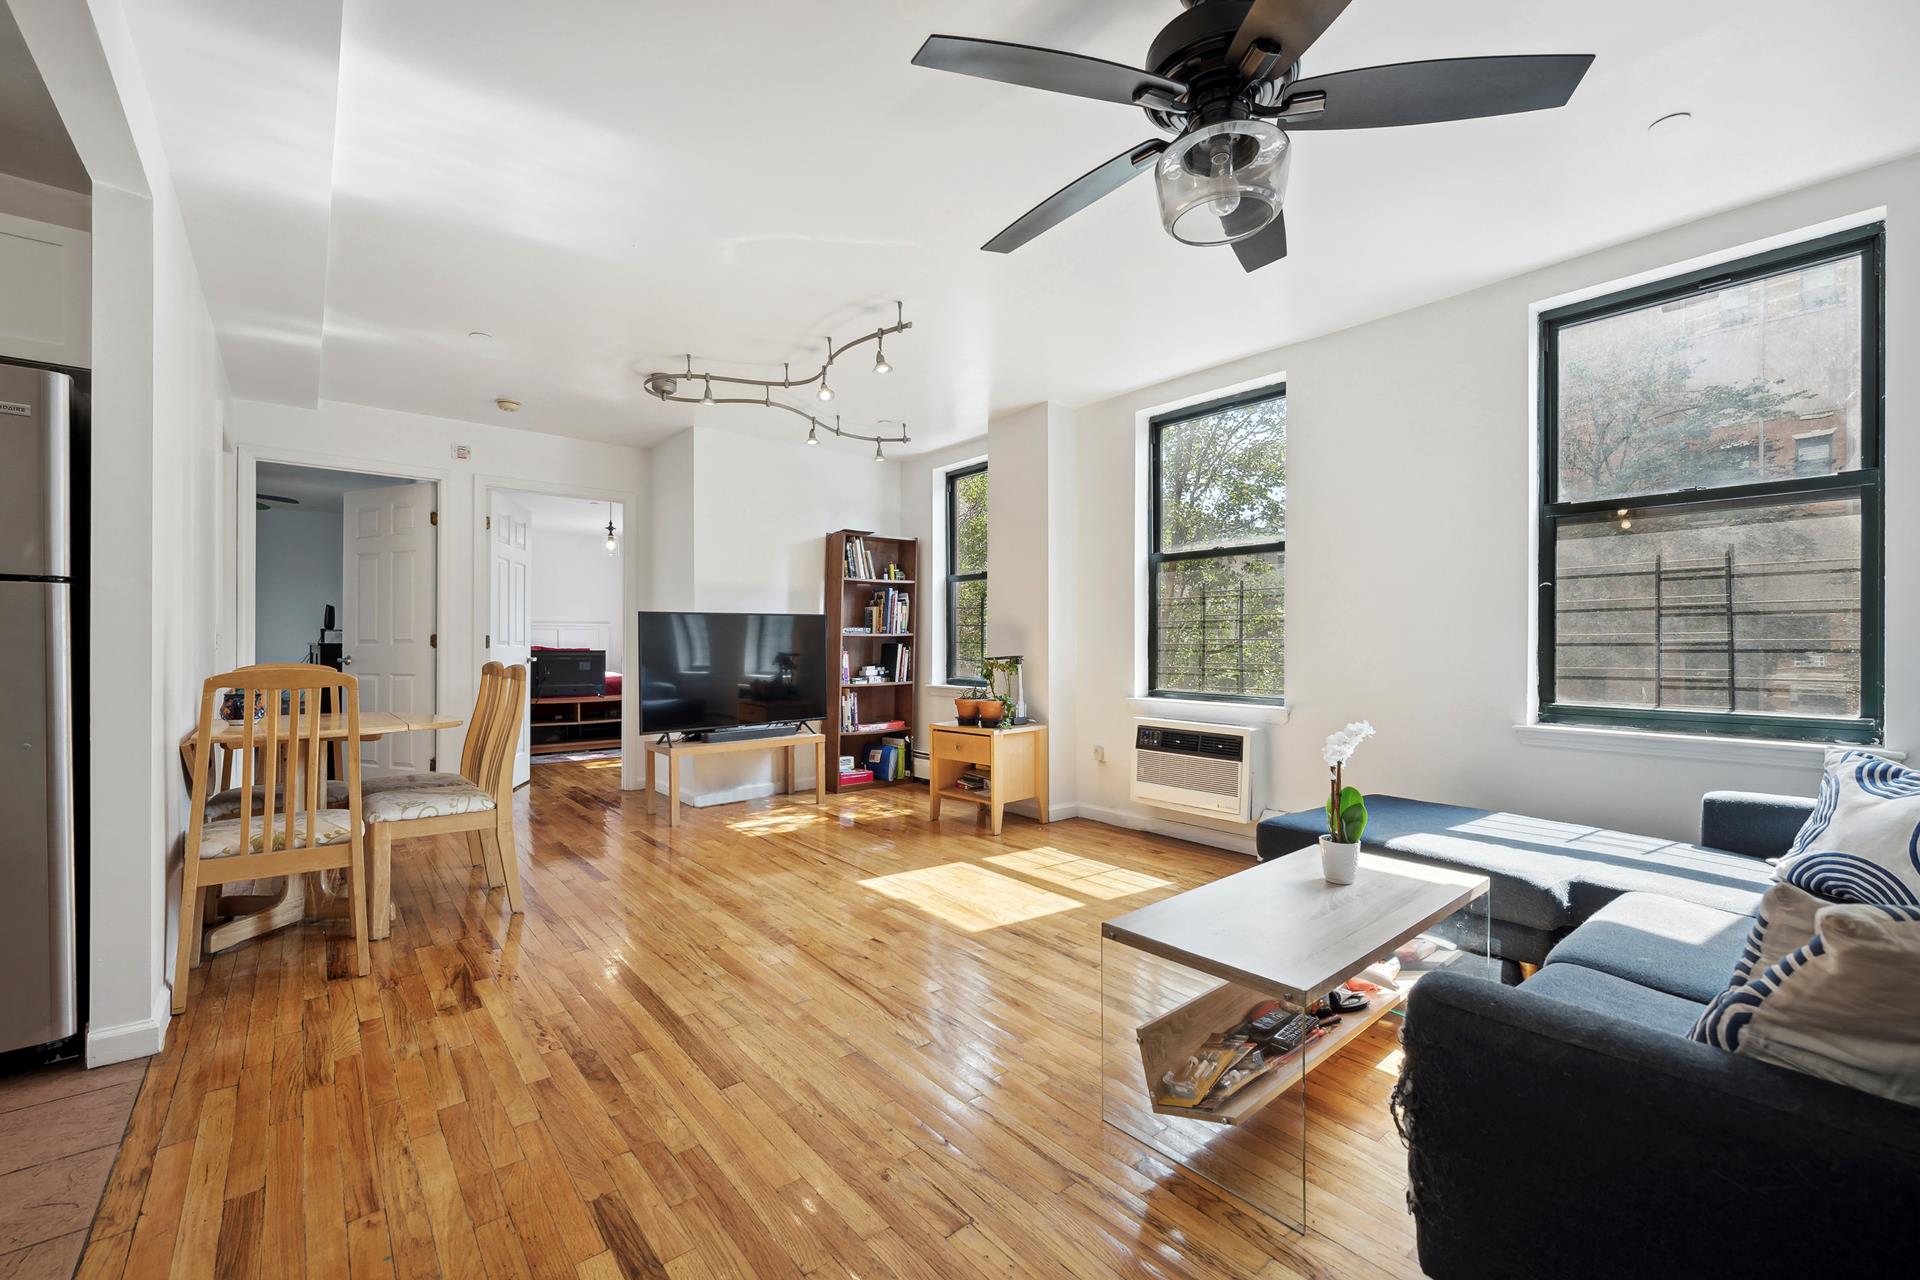 255 West 148th Street 2A, Central Harlem, Upper Manhattan, NYC - 2 Bedrooms  
1 Bathrooms  
4 Rooms - 